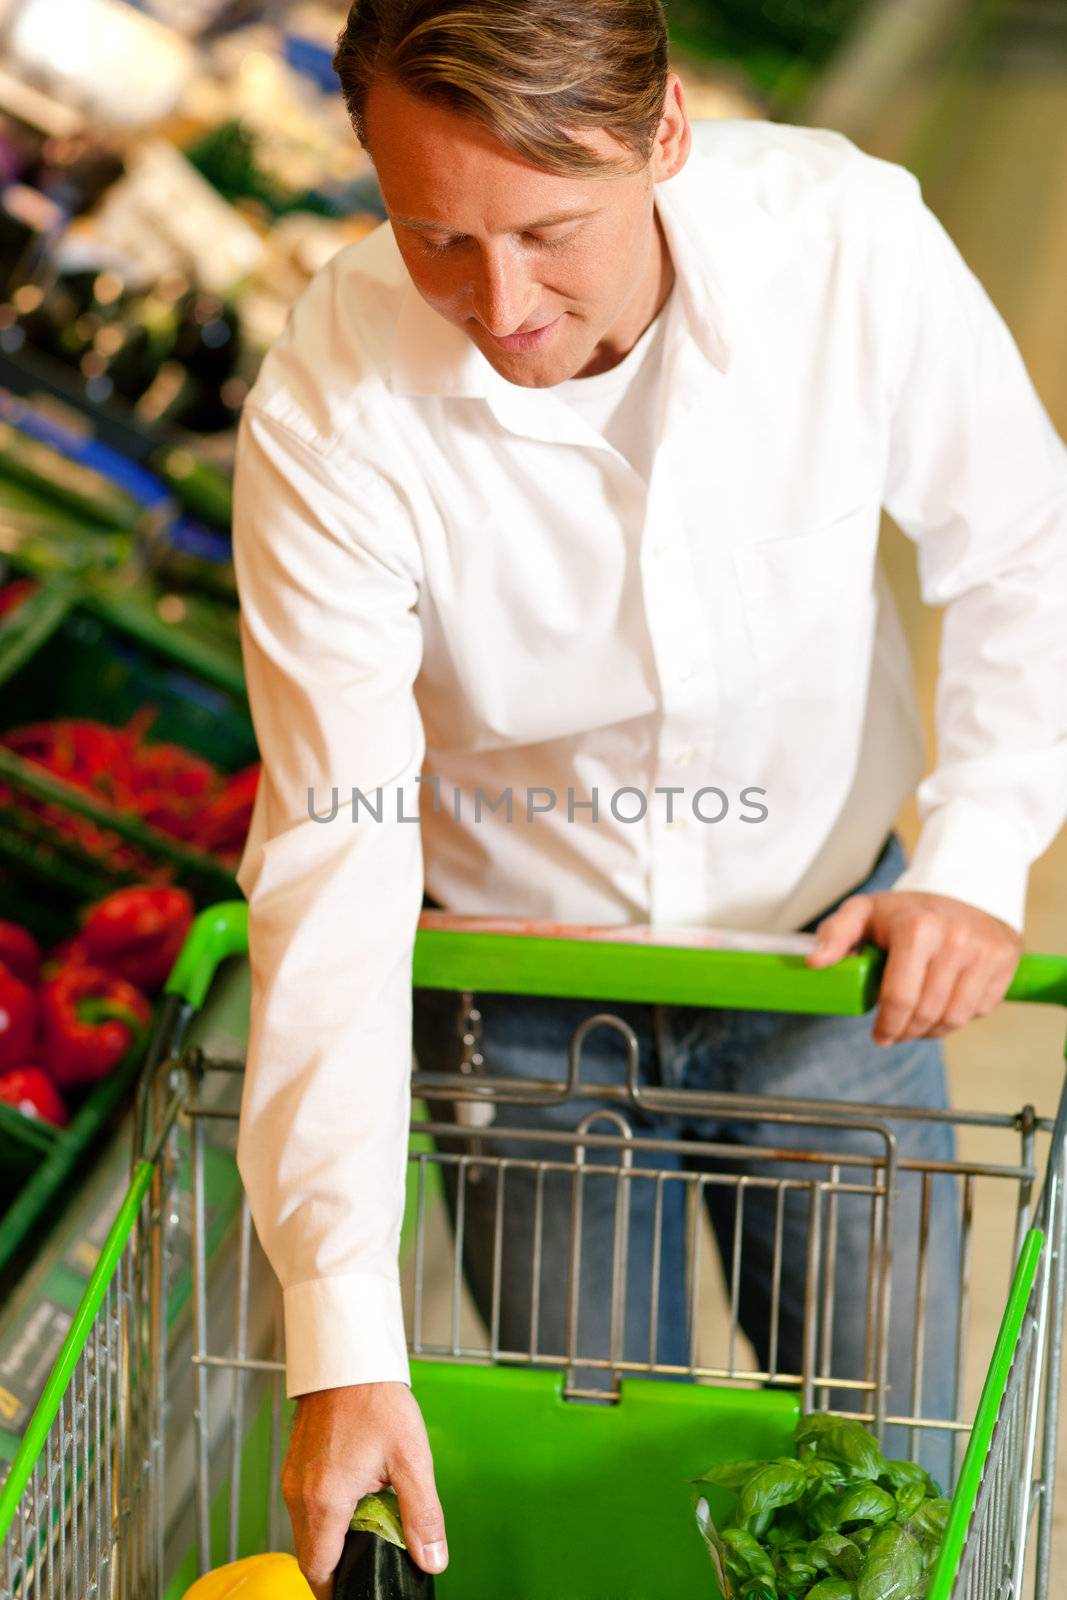 Man in a supermarket at the vegetable shelf shopping for groceries, he is putting some stuff into the shopping cart